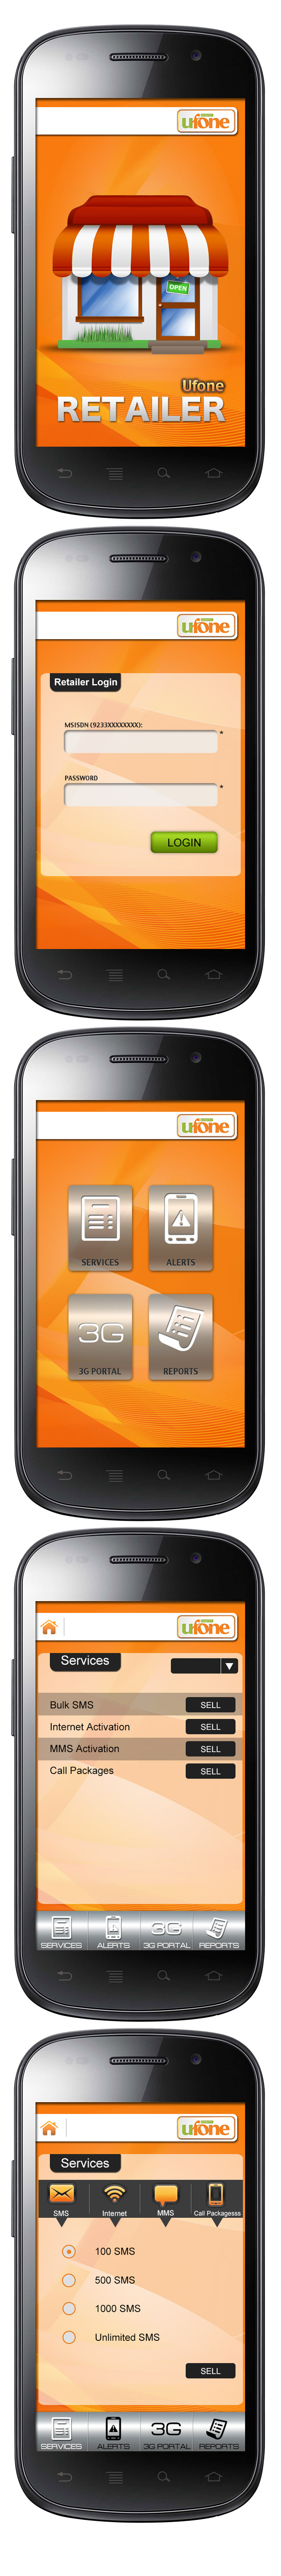 ufone retailer android Android App UI ux portal design